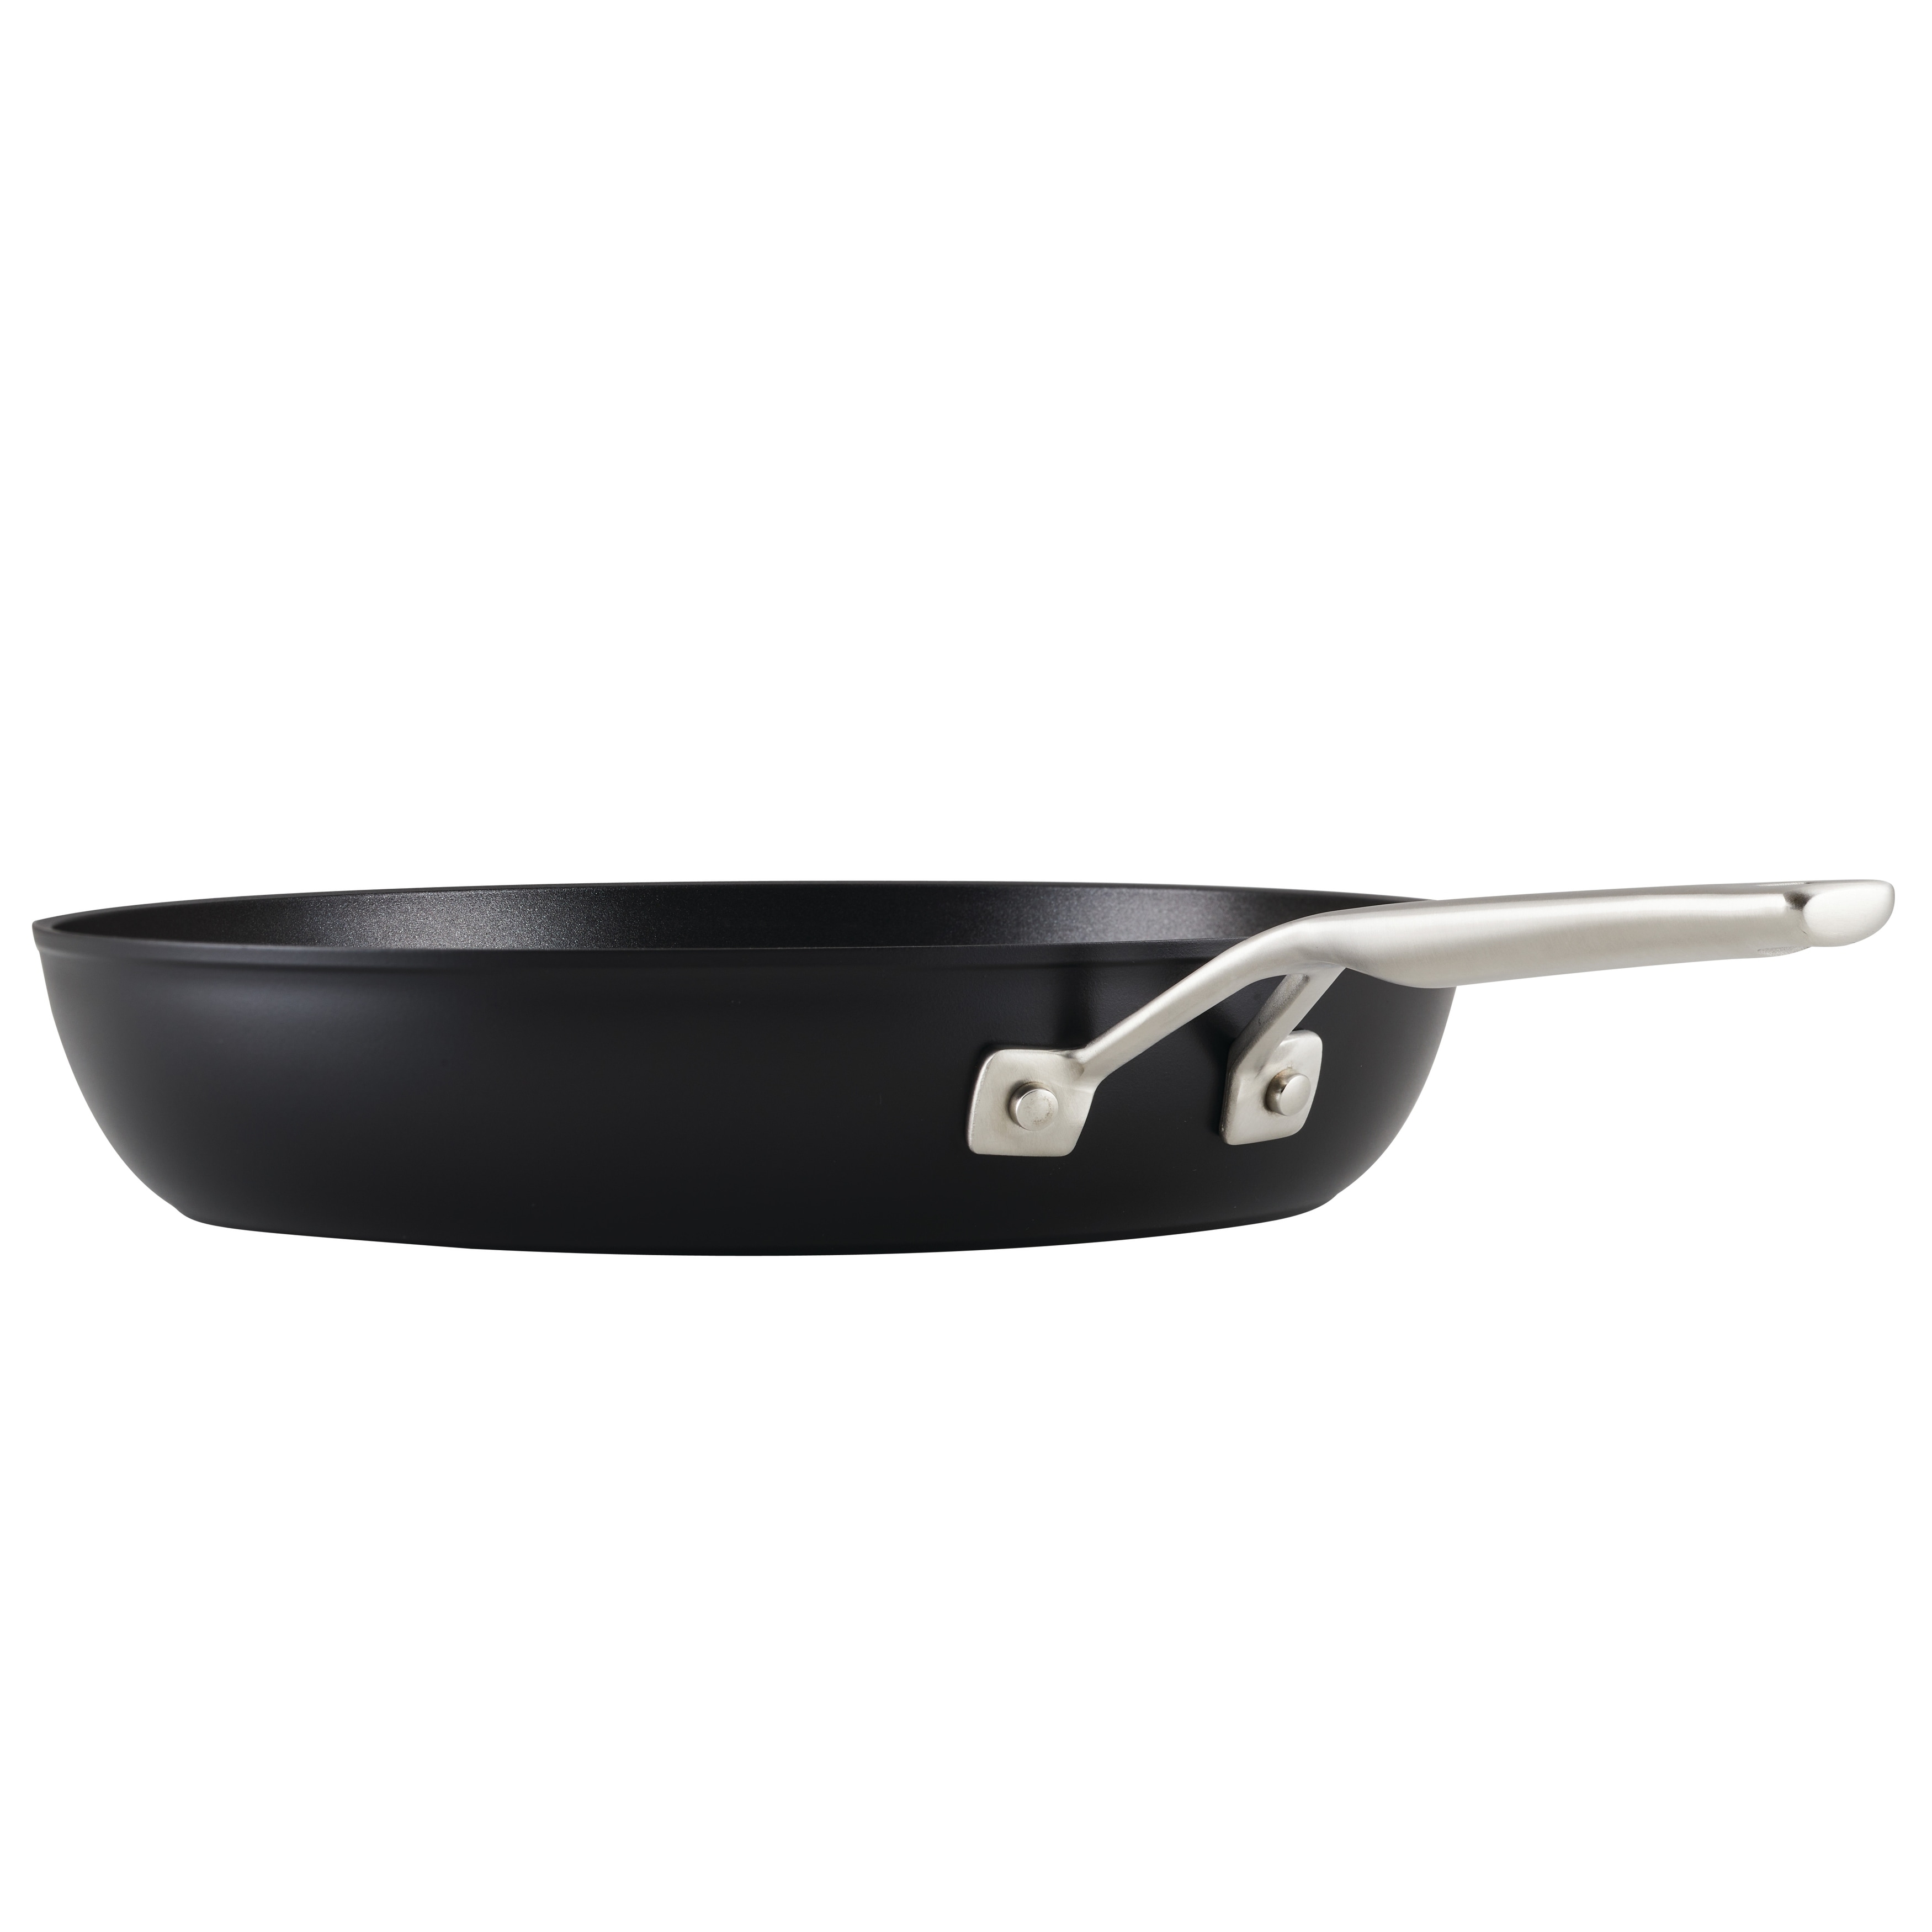 KitchenAid Hard Anodized Induction Nonstick Stir Fry Pan/Wok with